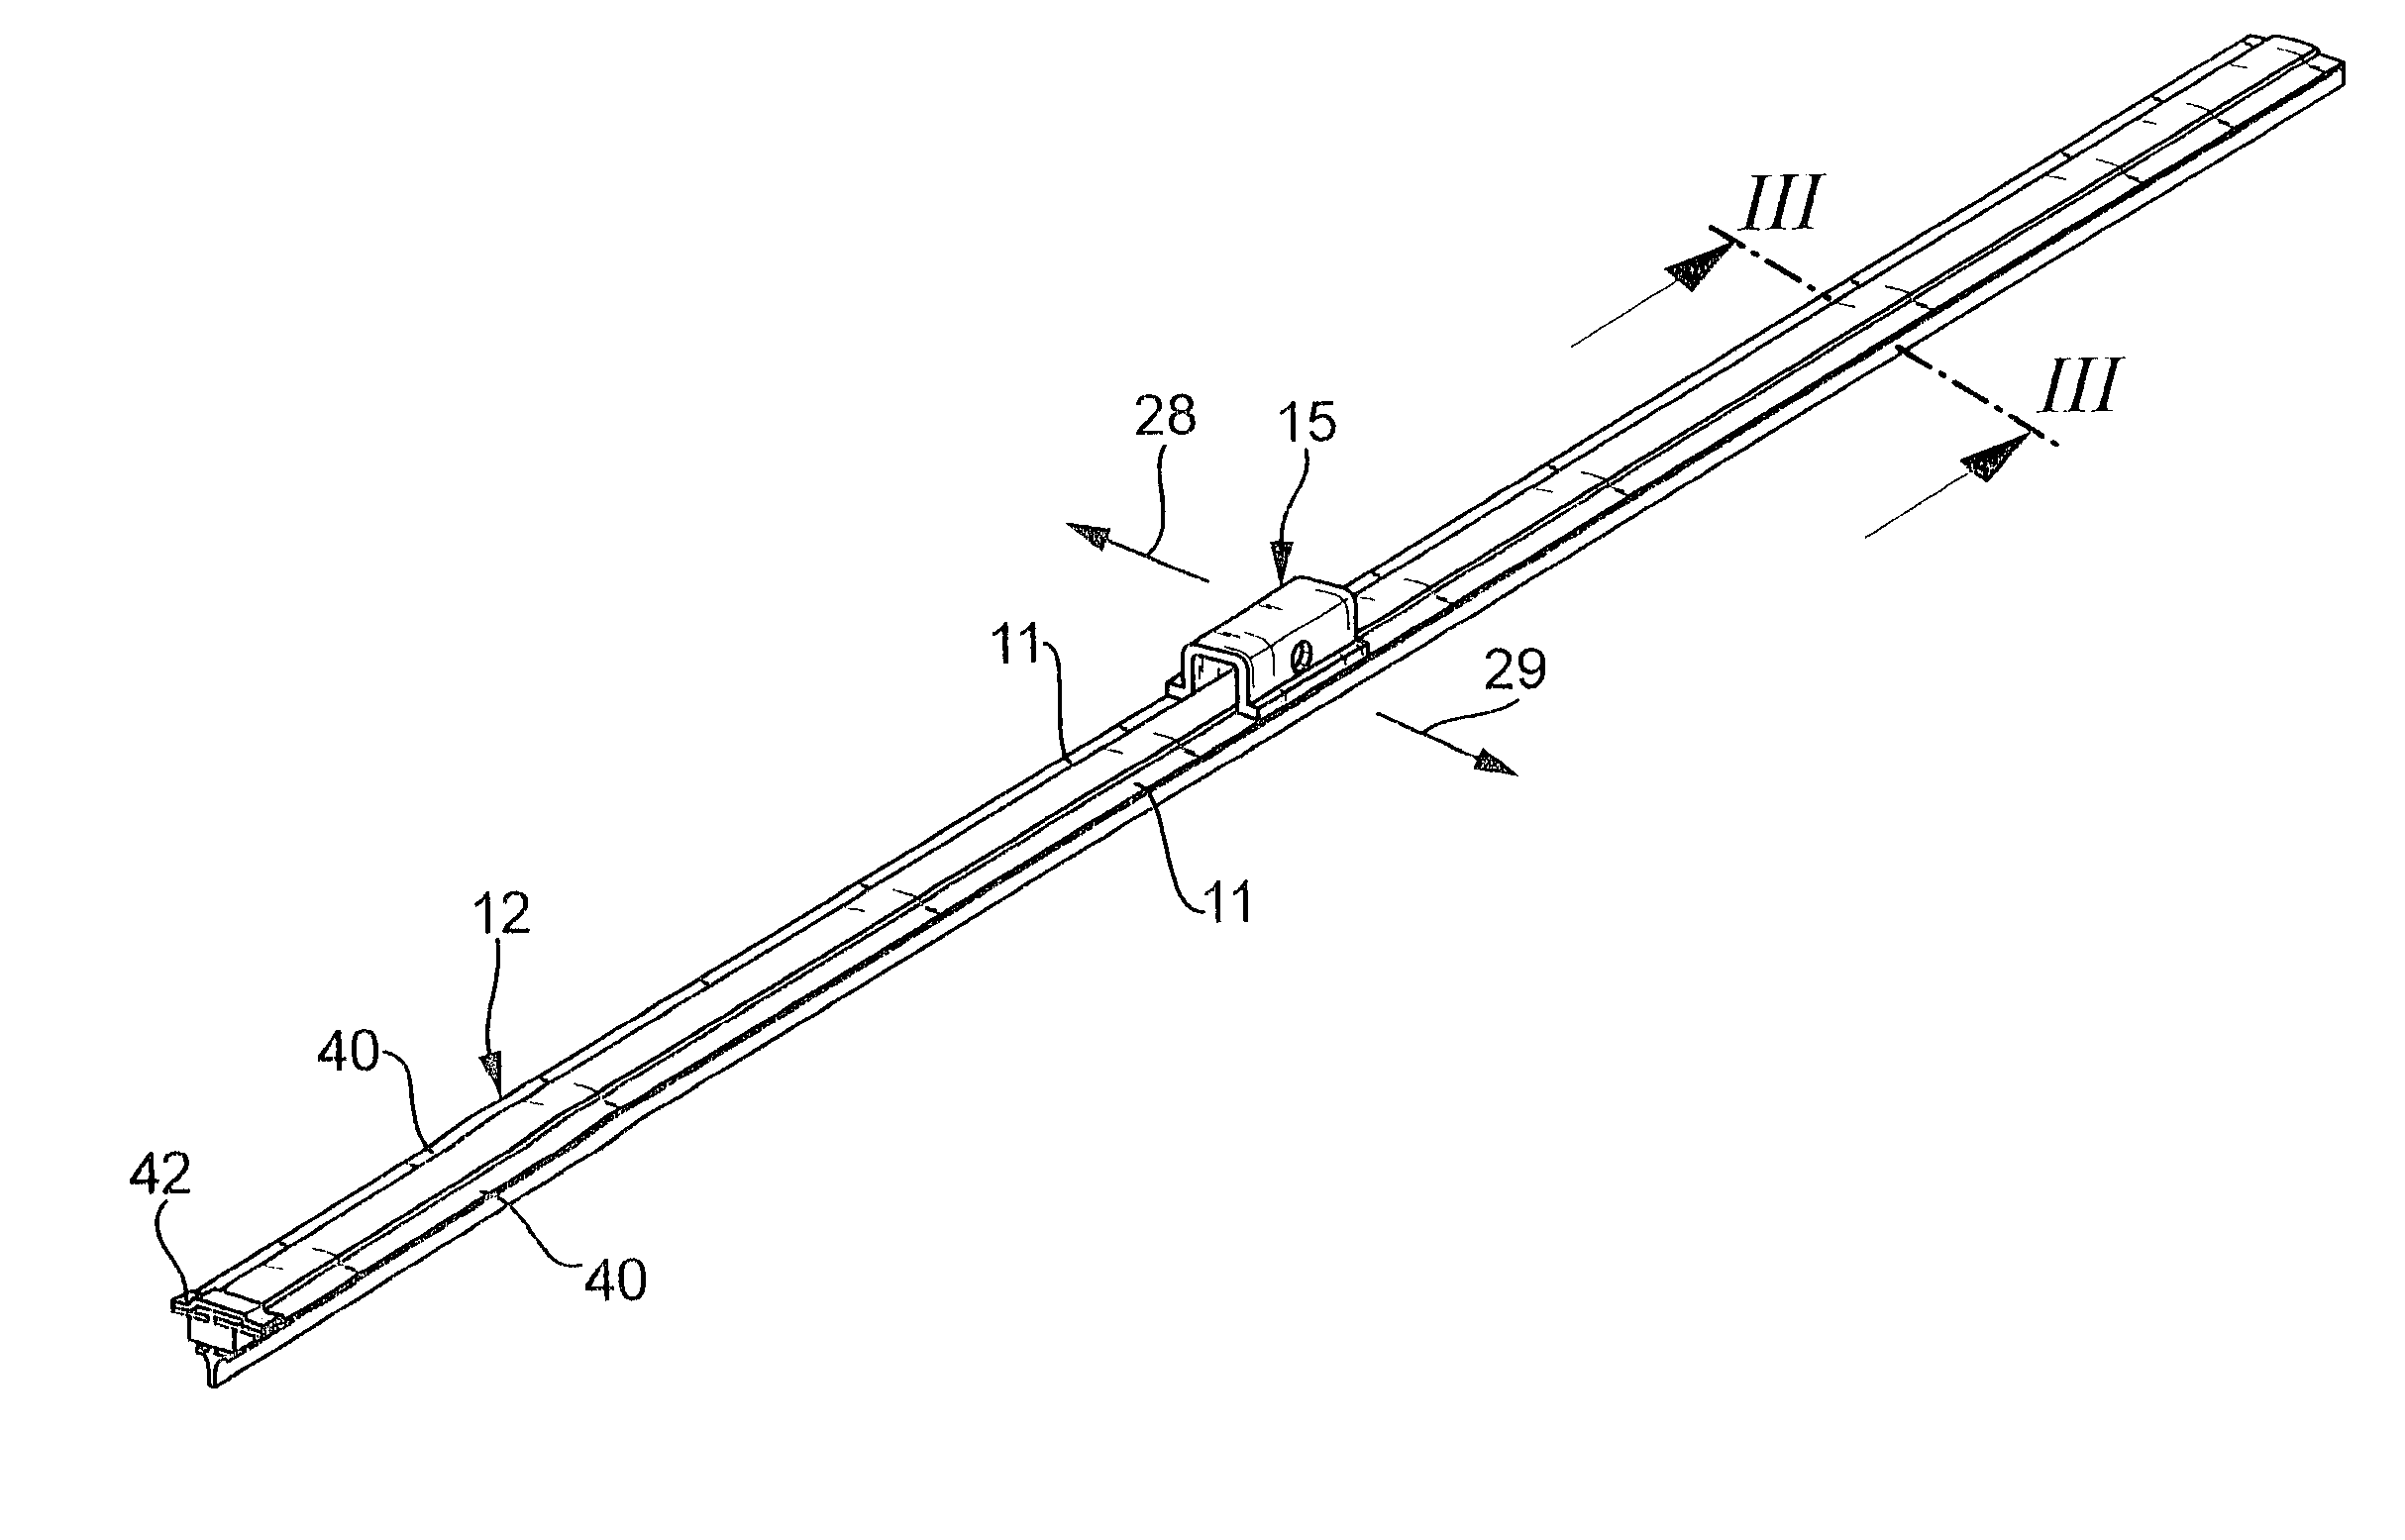 Wiper blade for cleaning glass panes, especially of motor vehicles, and method for the production of said wiper blade